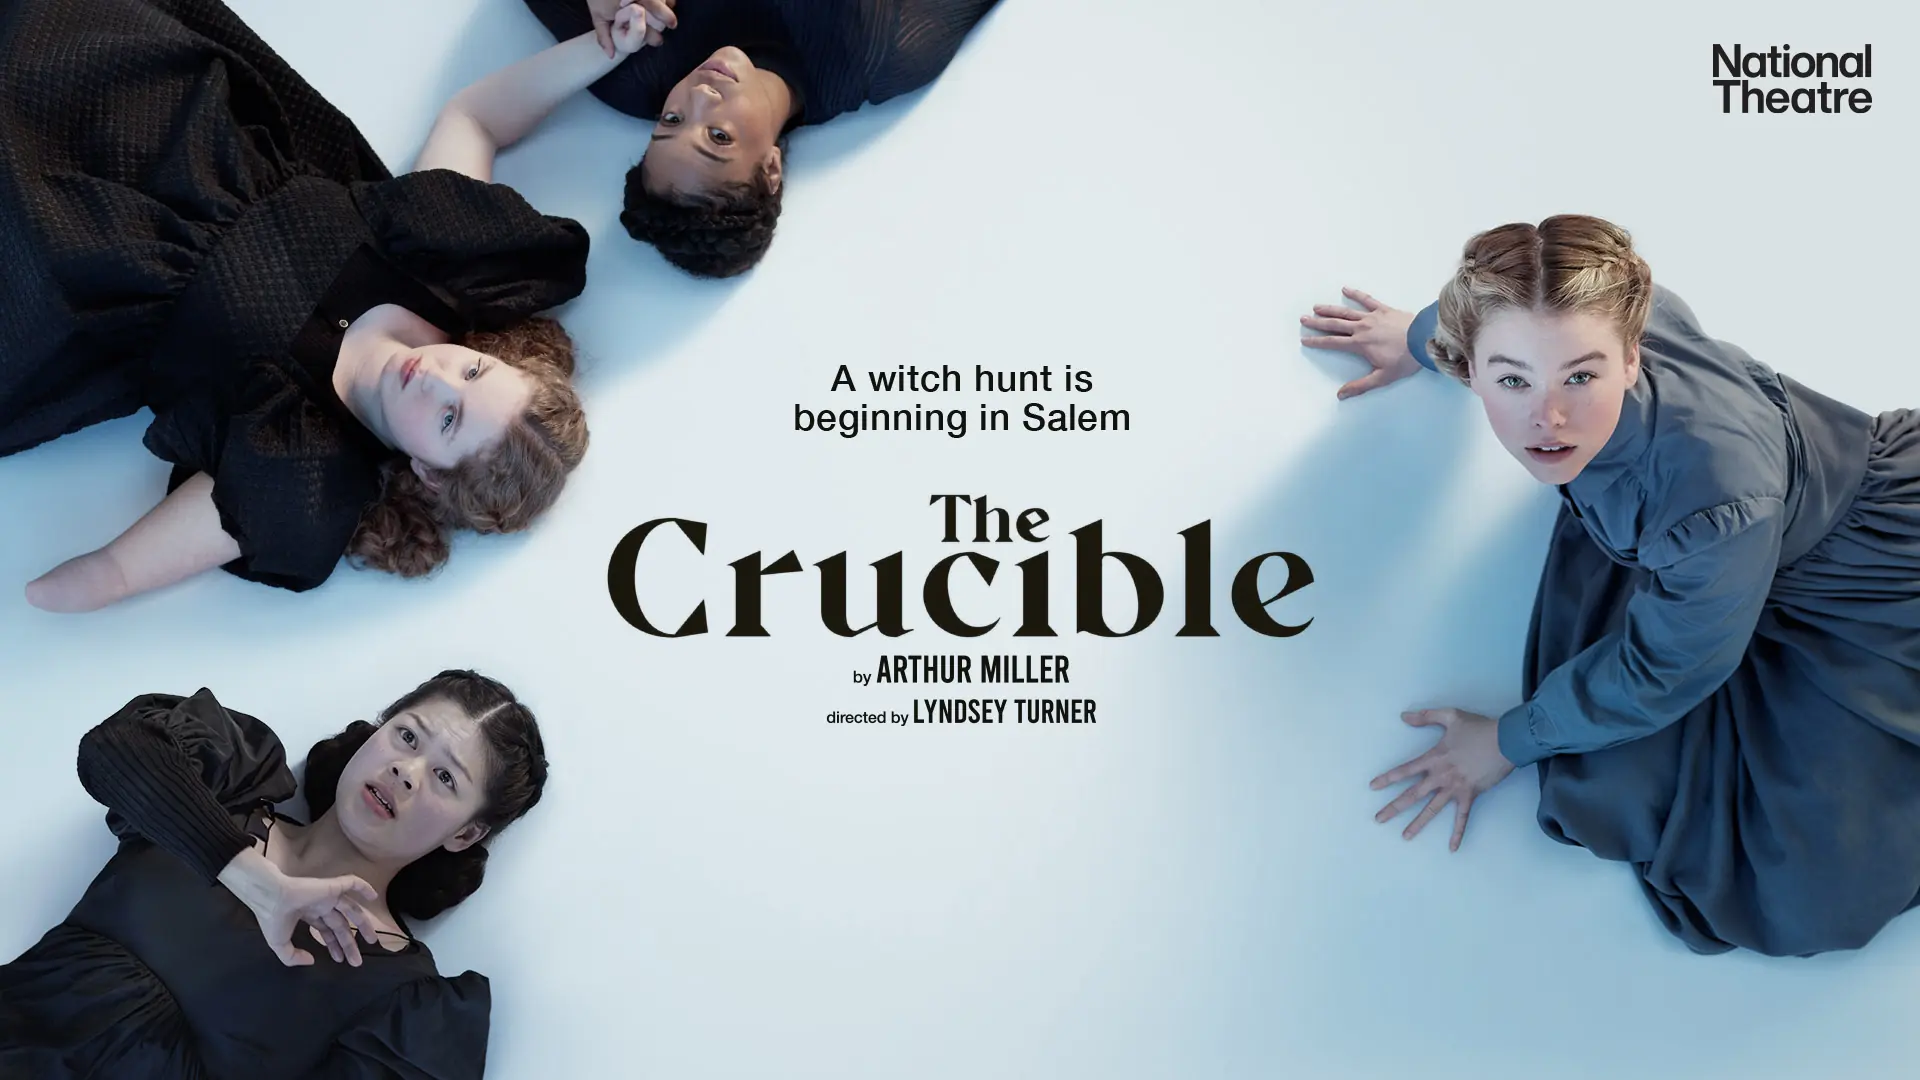 The Crucible at the Gielgud Theatre in London's West End